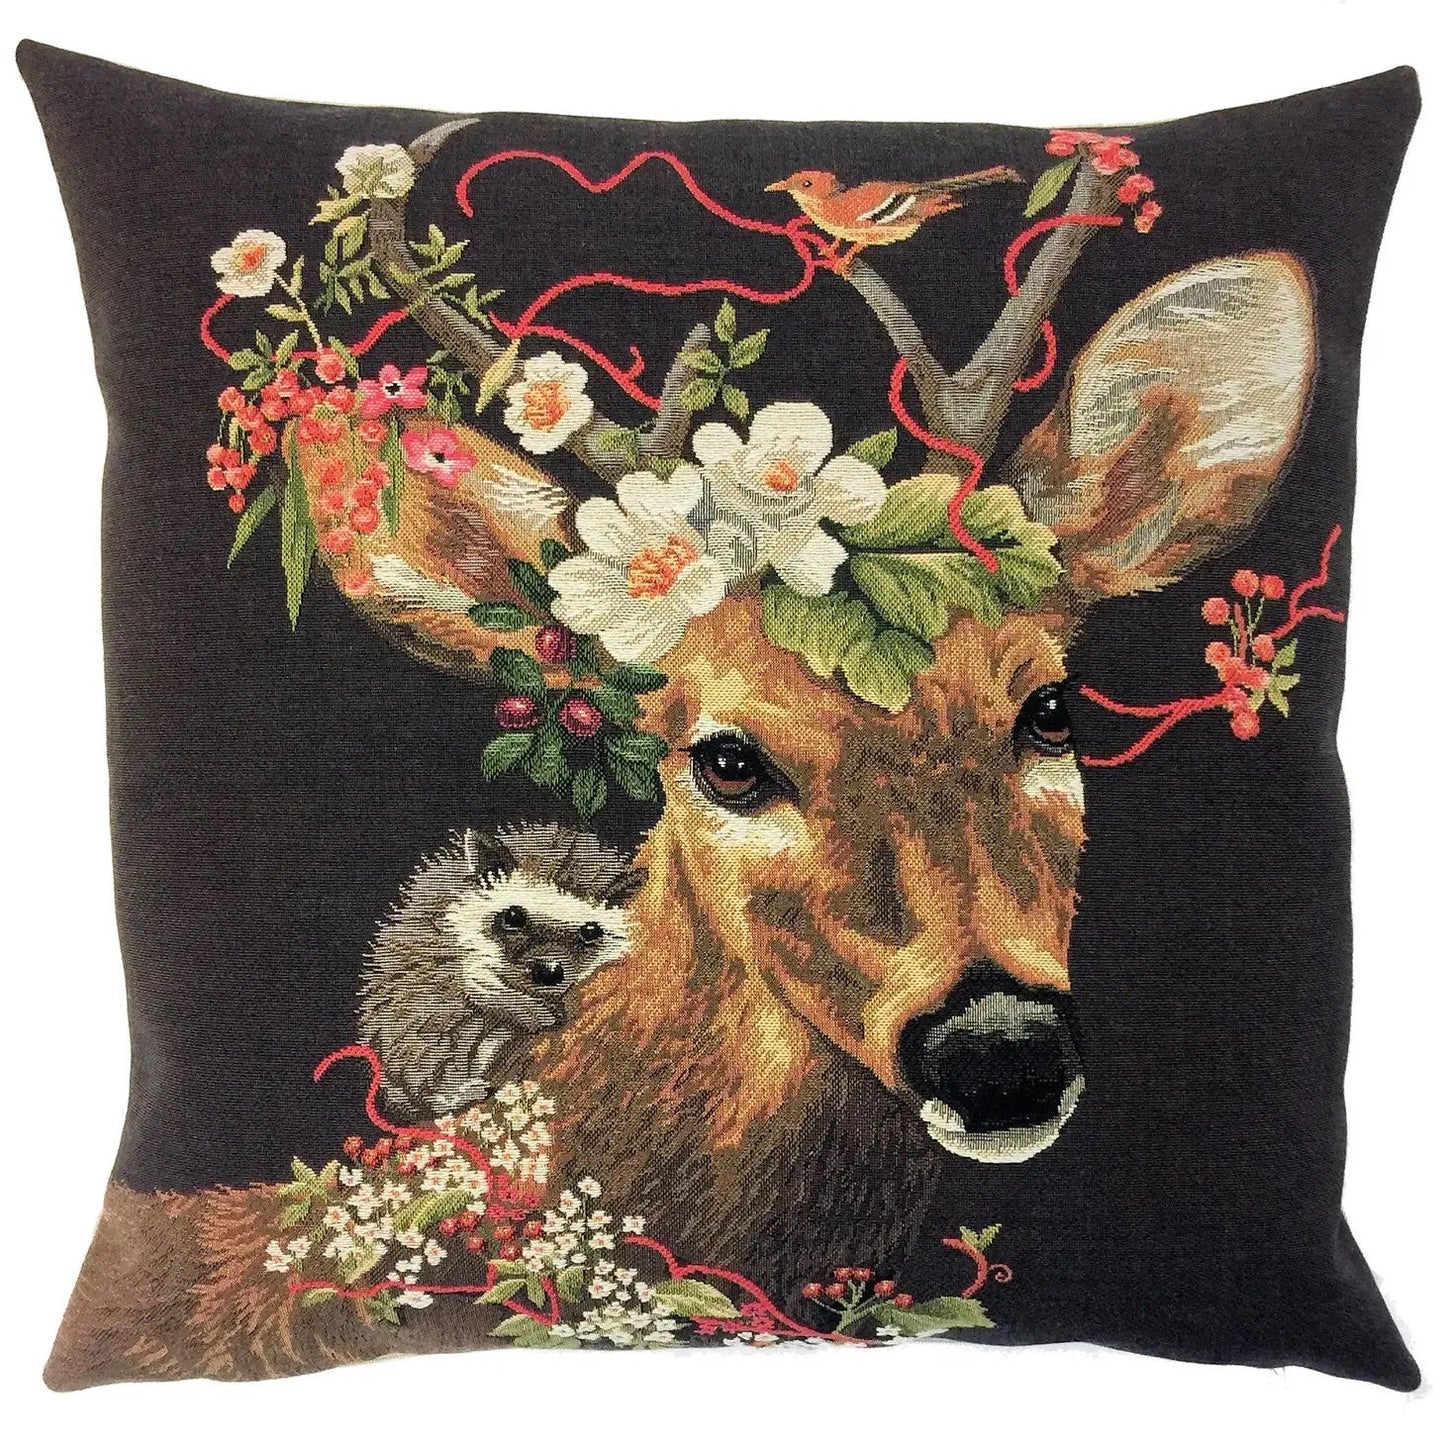 Pillow: Stag with Hedgehog Pillow